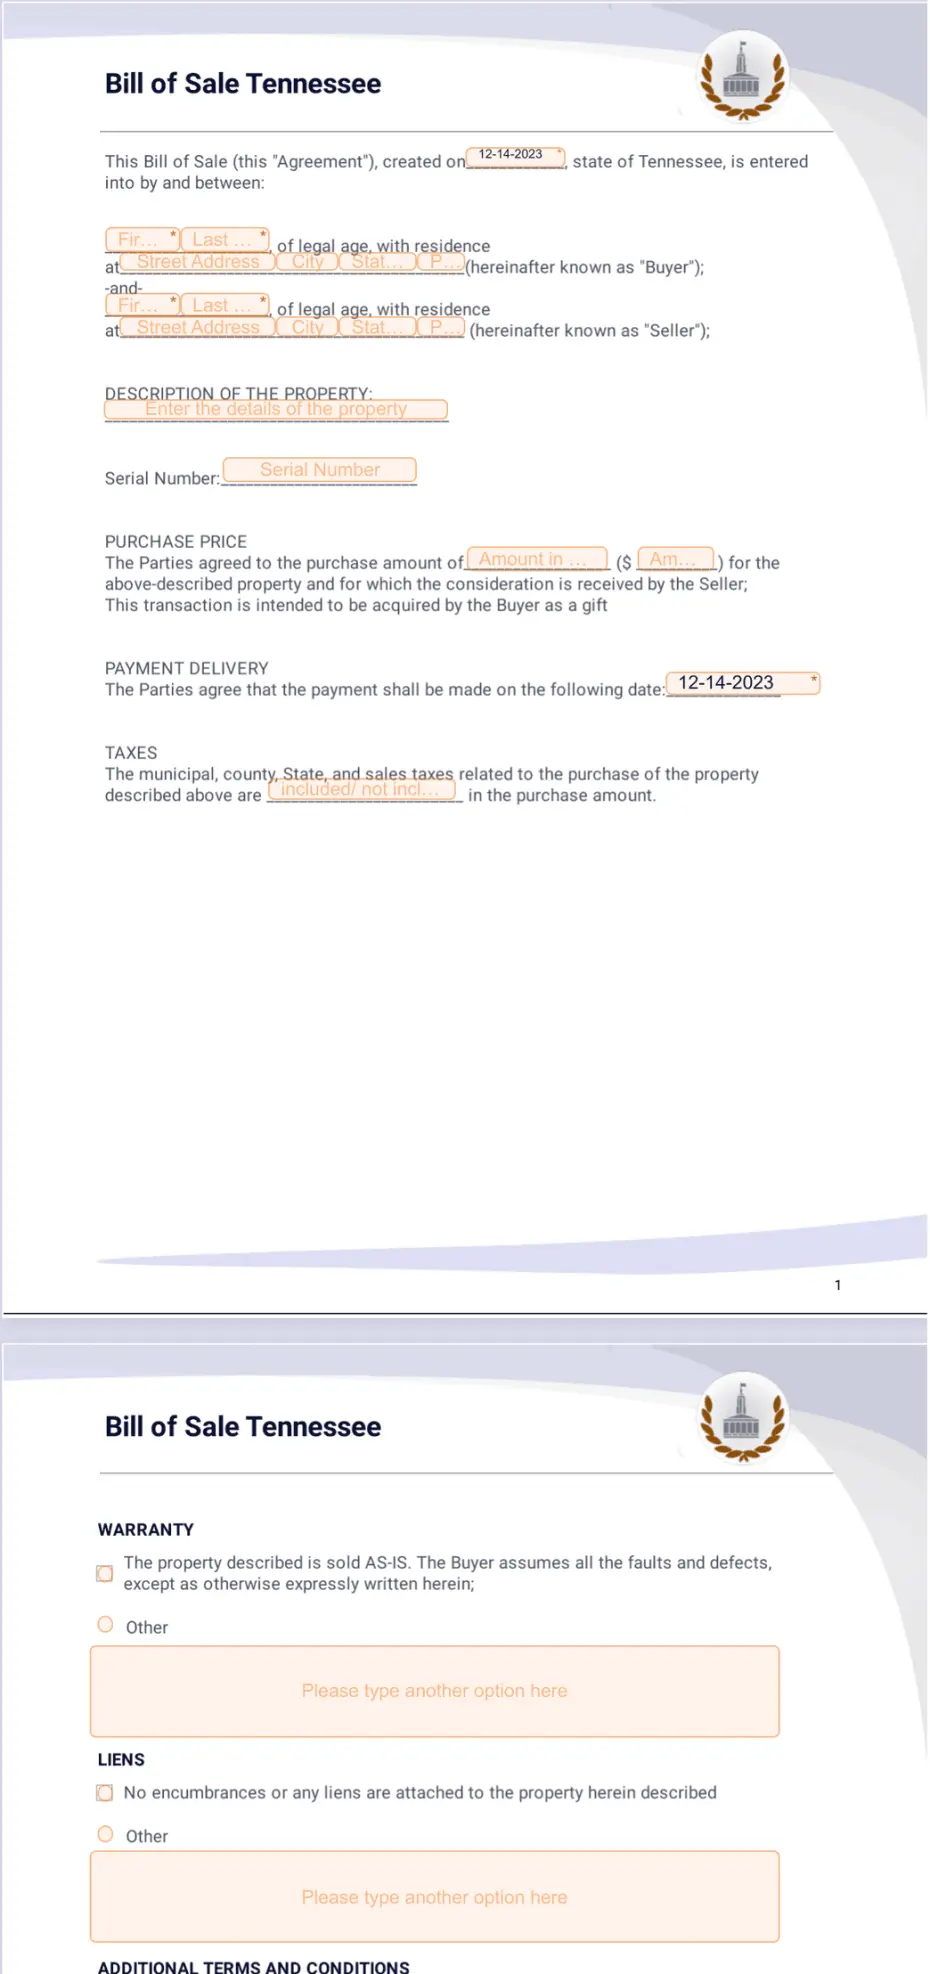 Bill of Sale Tennessee